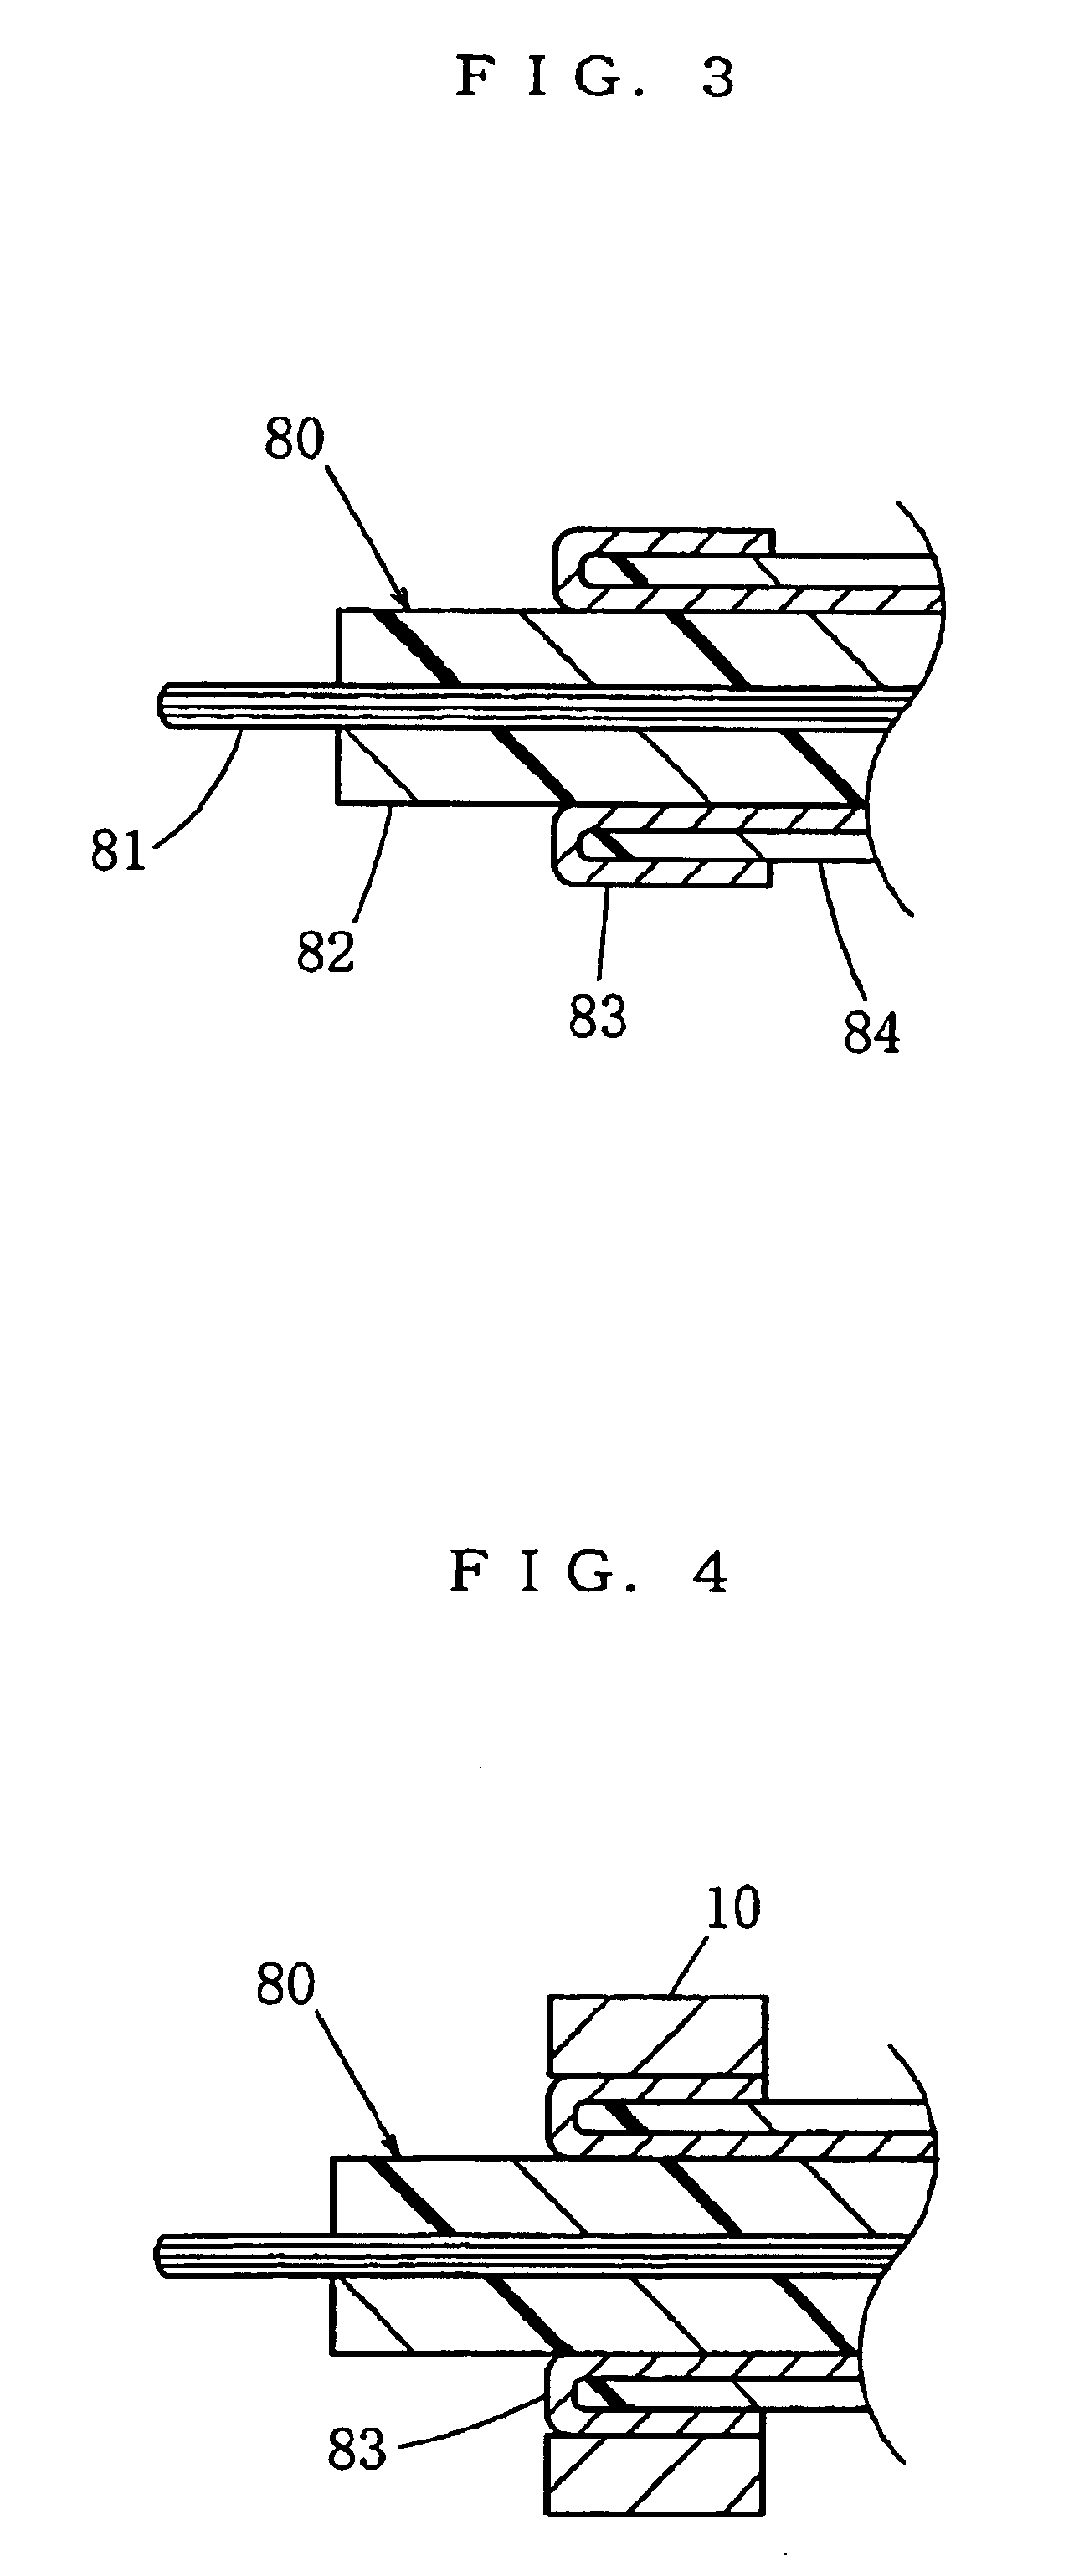 Binding member for coaxial cable and an electric connector for coaxial cable both using resin solder, and a method of connecting the binding member to coaxial cable or the electric connector